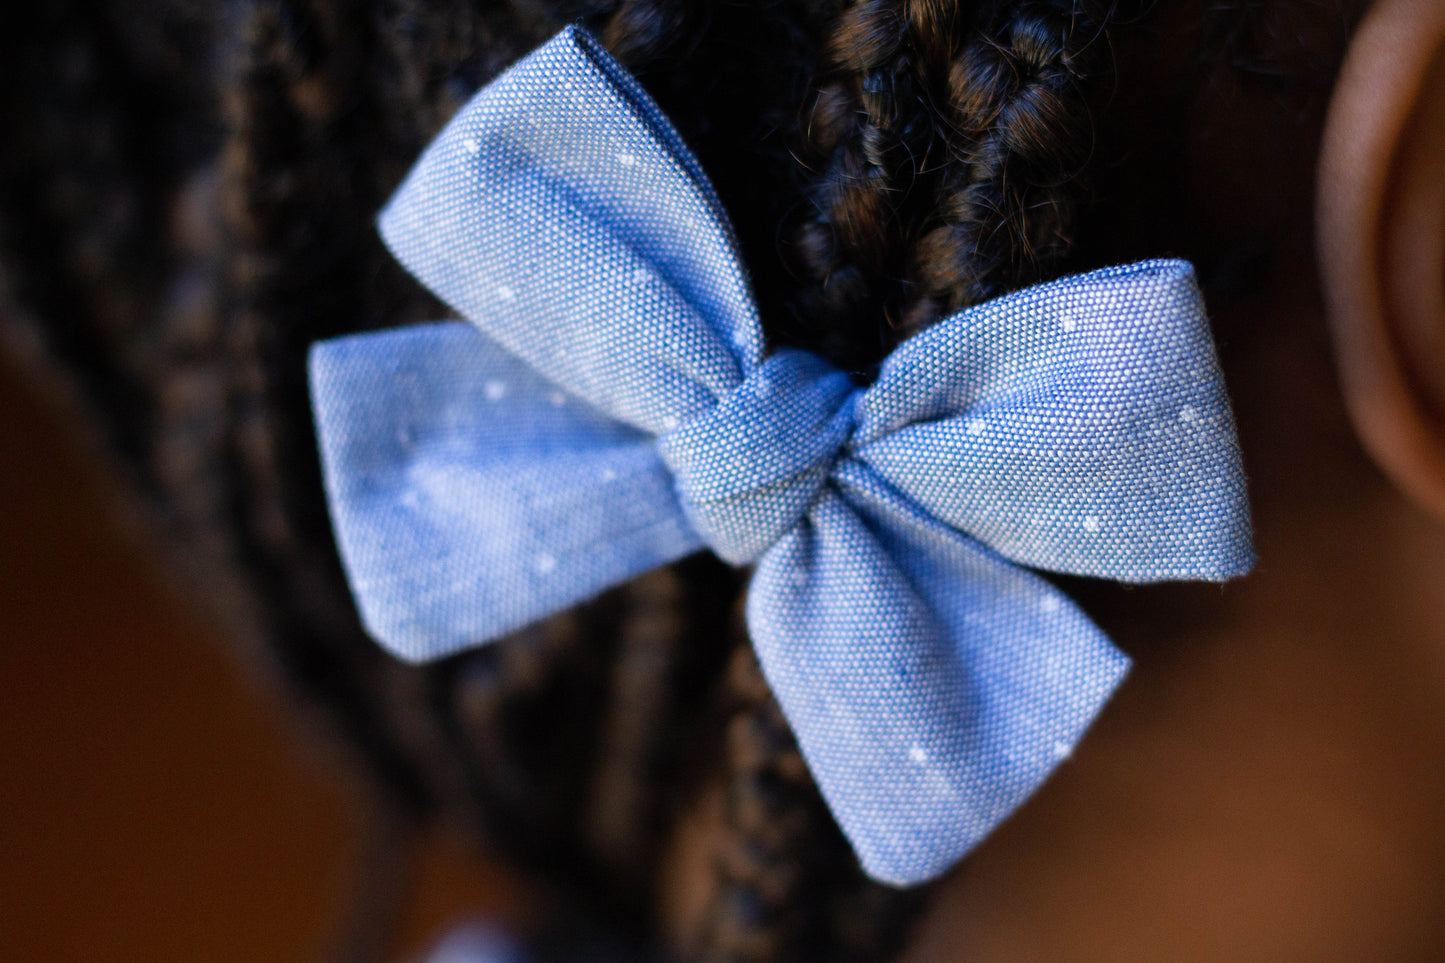 CHAMBRAY DOTS PIGTAIL BOWS on braid hairstyle